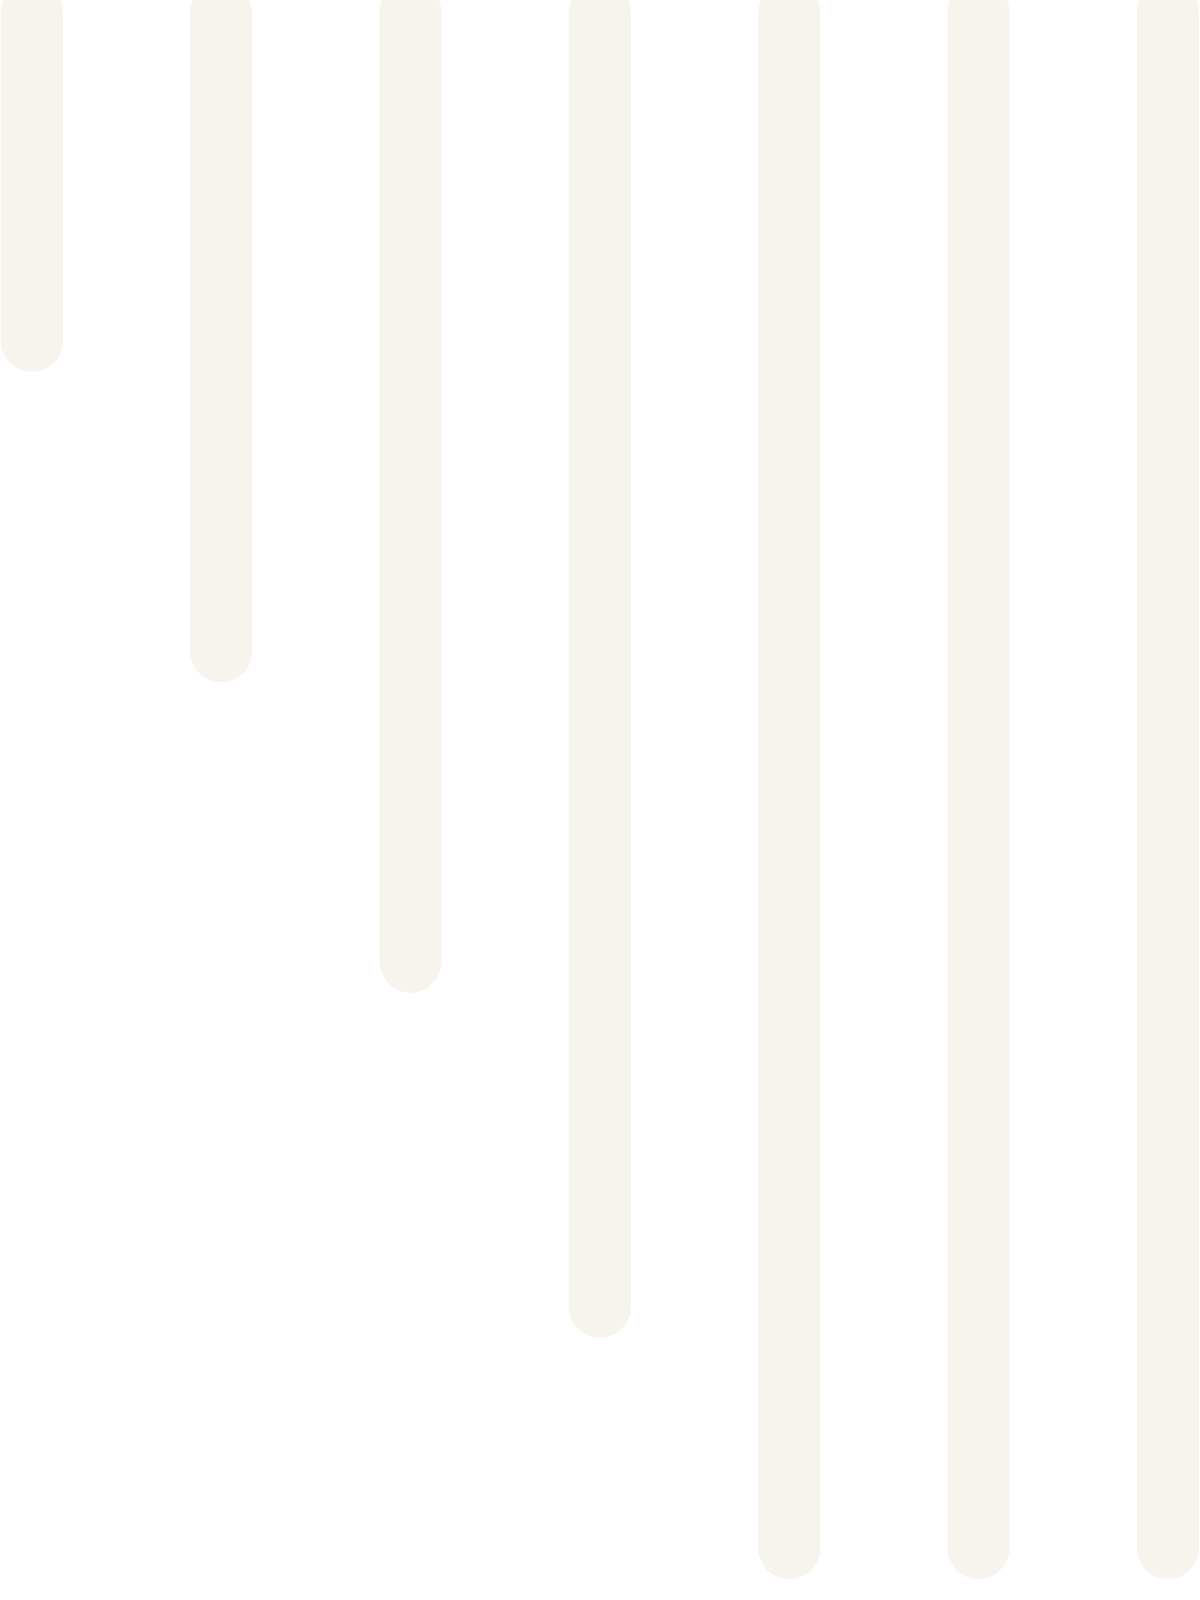 interface/vert-lines-gold.png